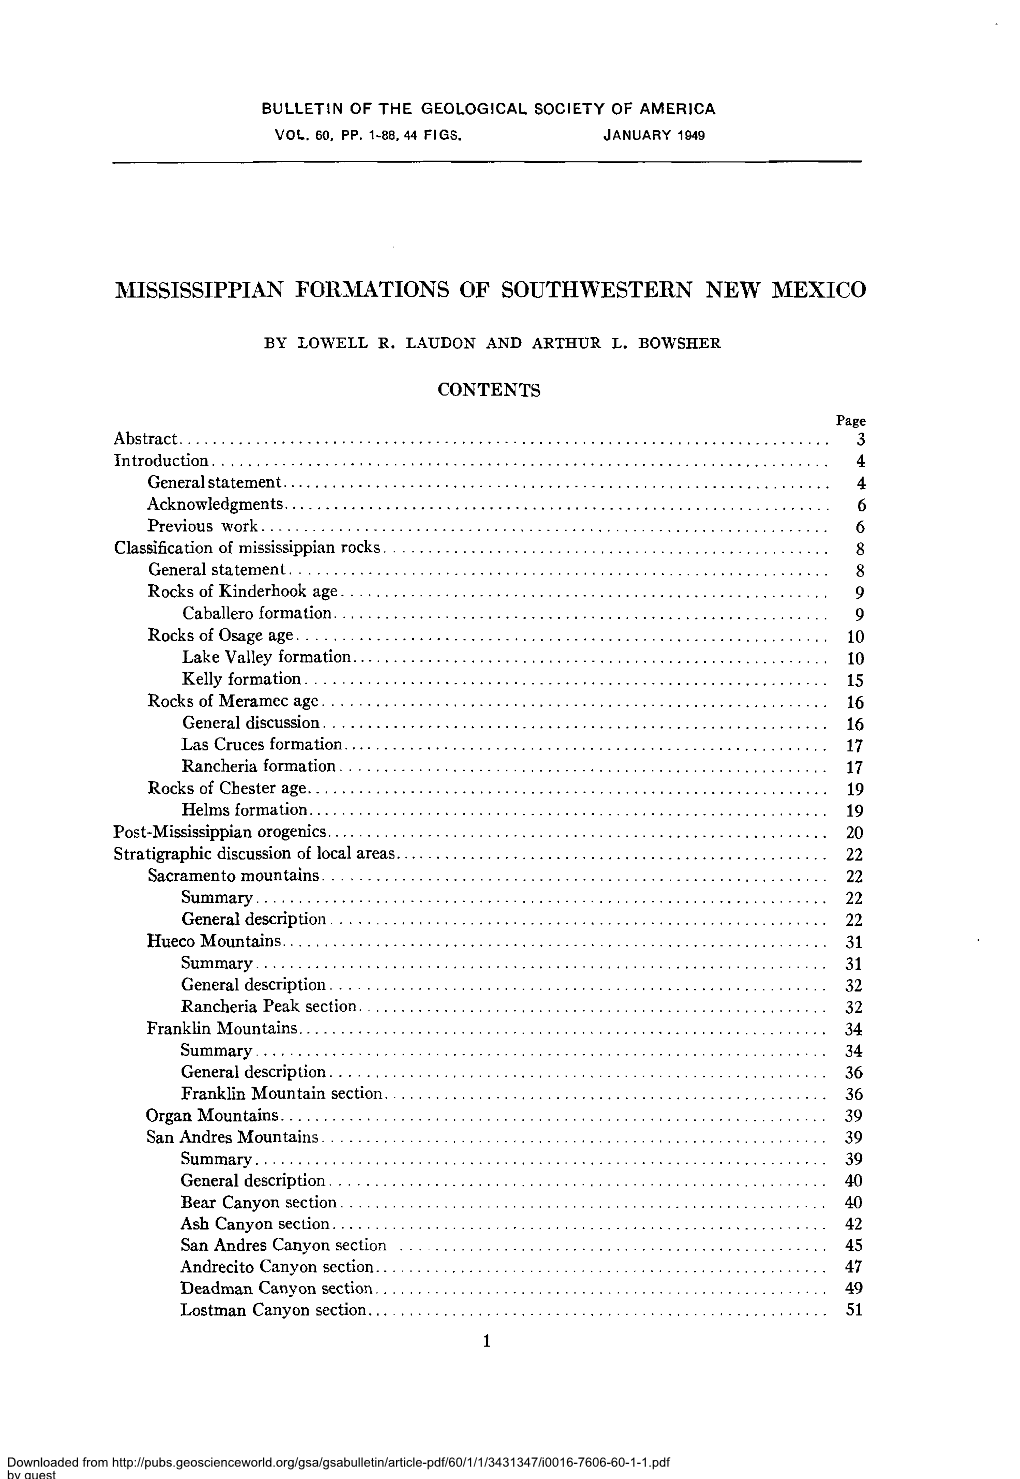 Bulletin of the Geological Society of America Vol. 60